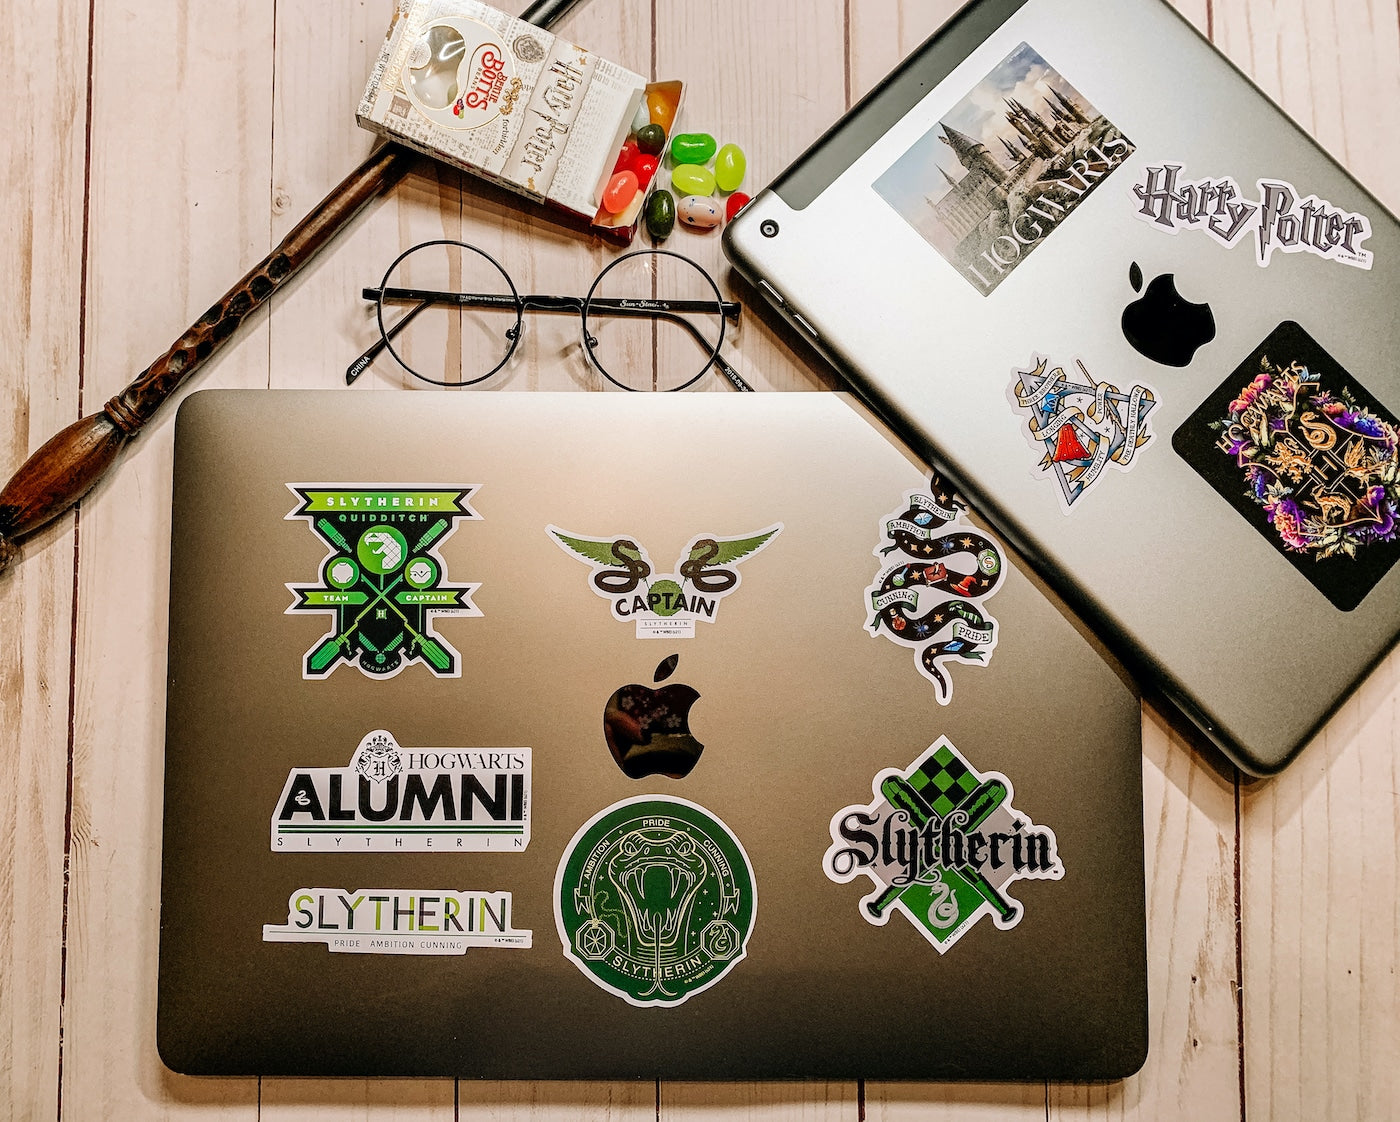 Harry Potter Slytherin Decals (50-Pack)